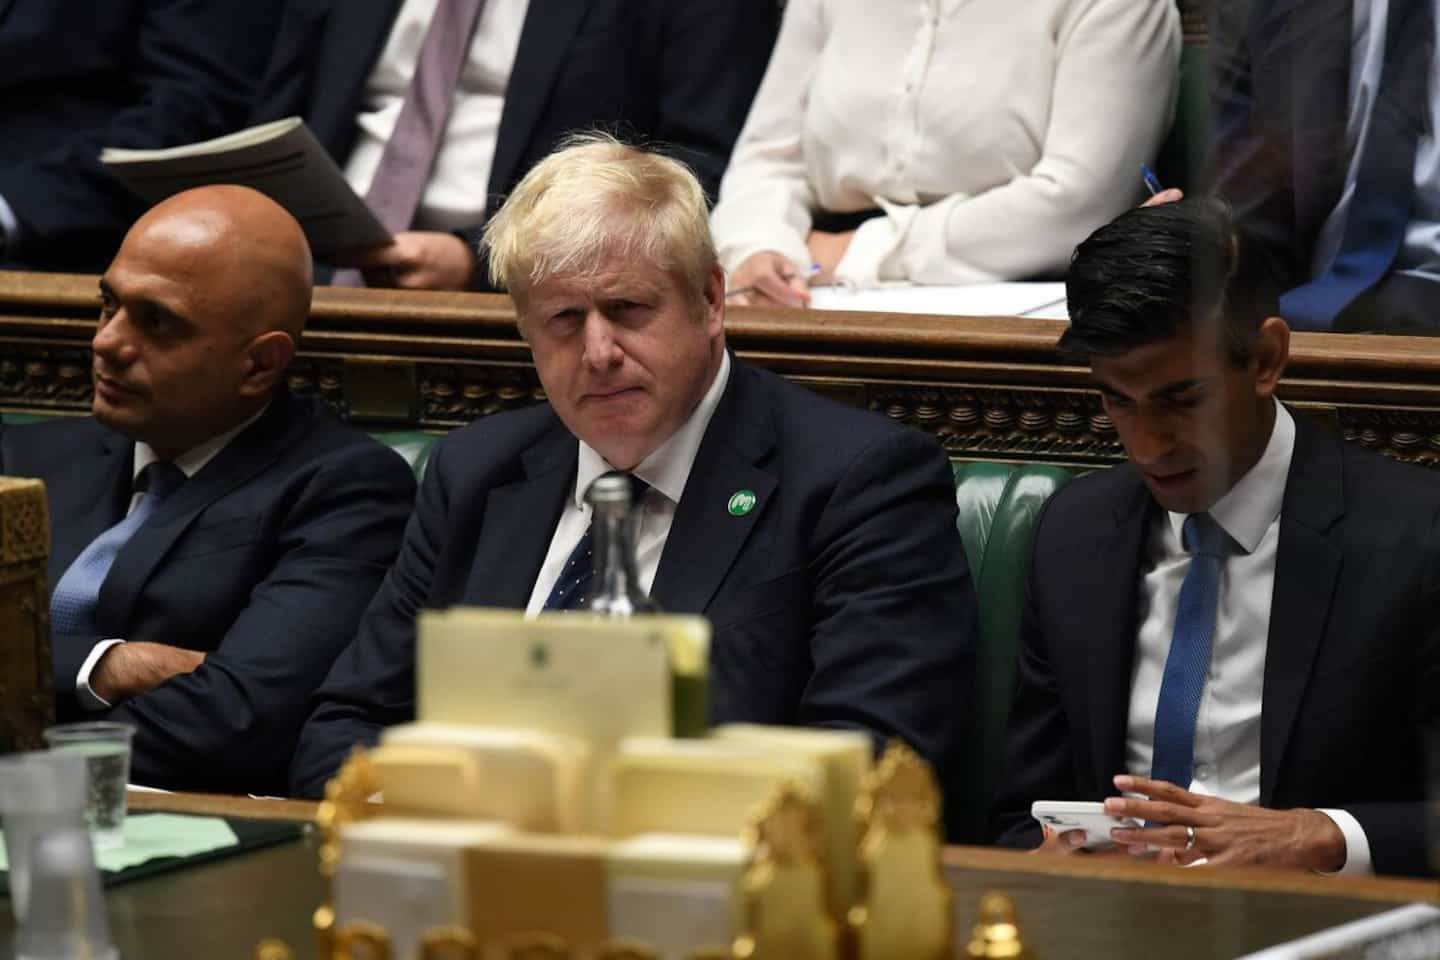 Two key ministers quit Boris Johnson's government